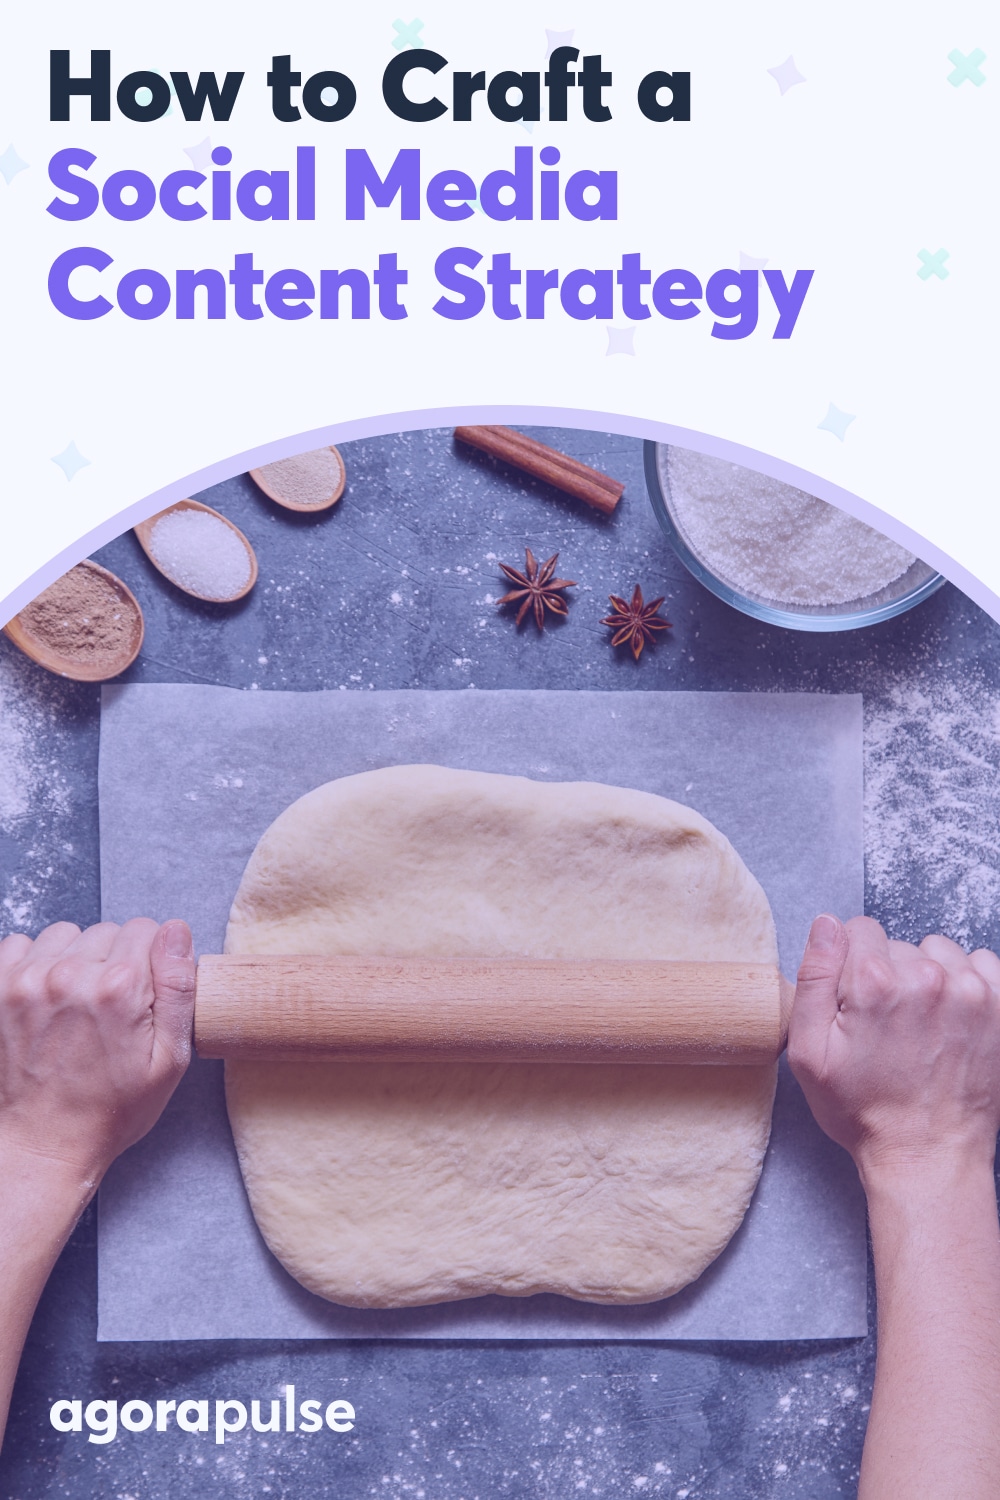 How to Craft a Successful Social Media Content Strategy